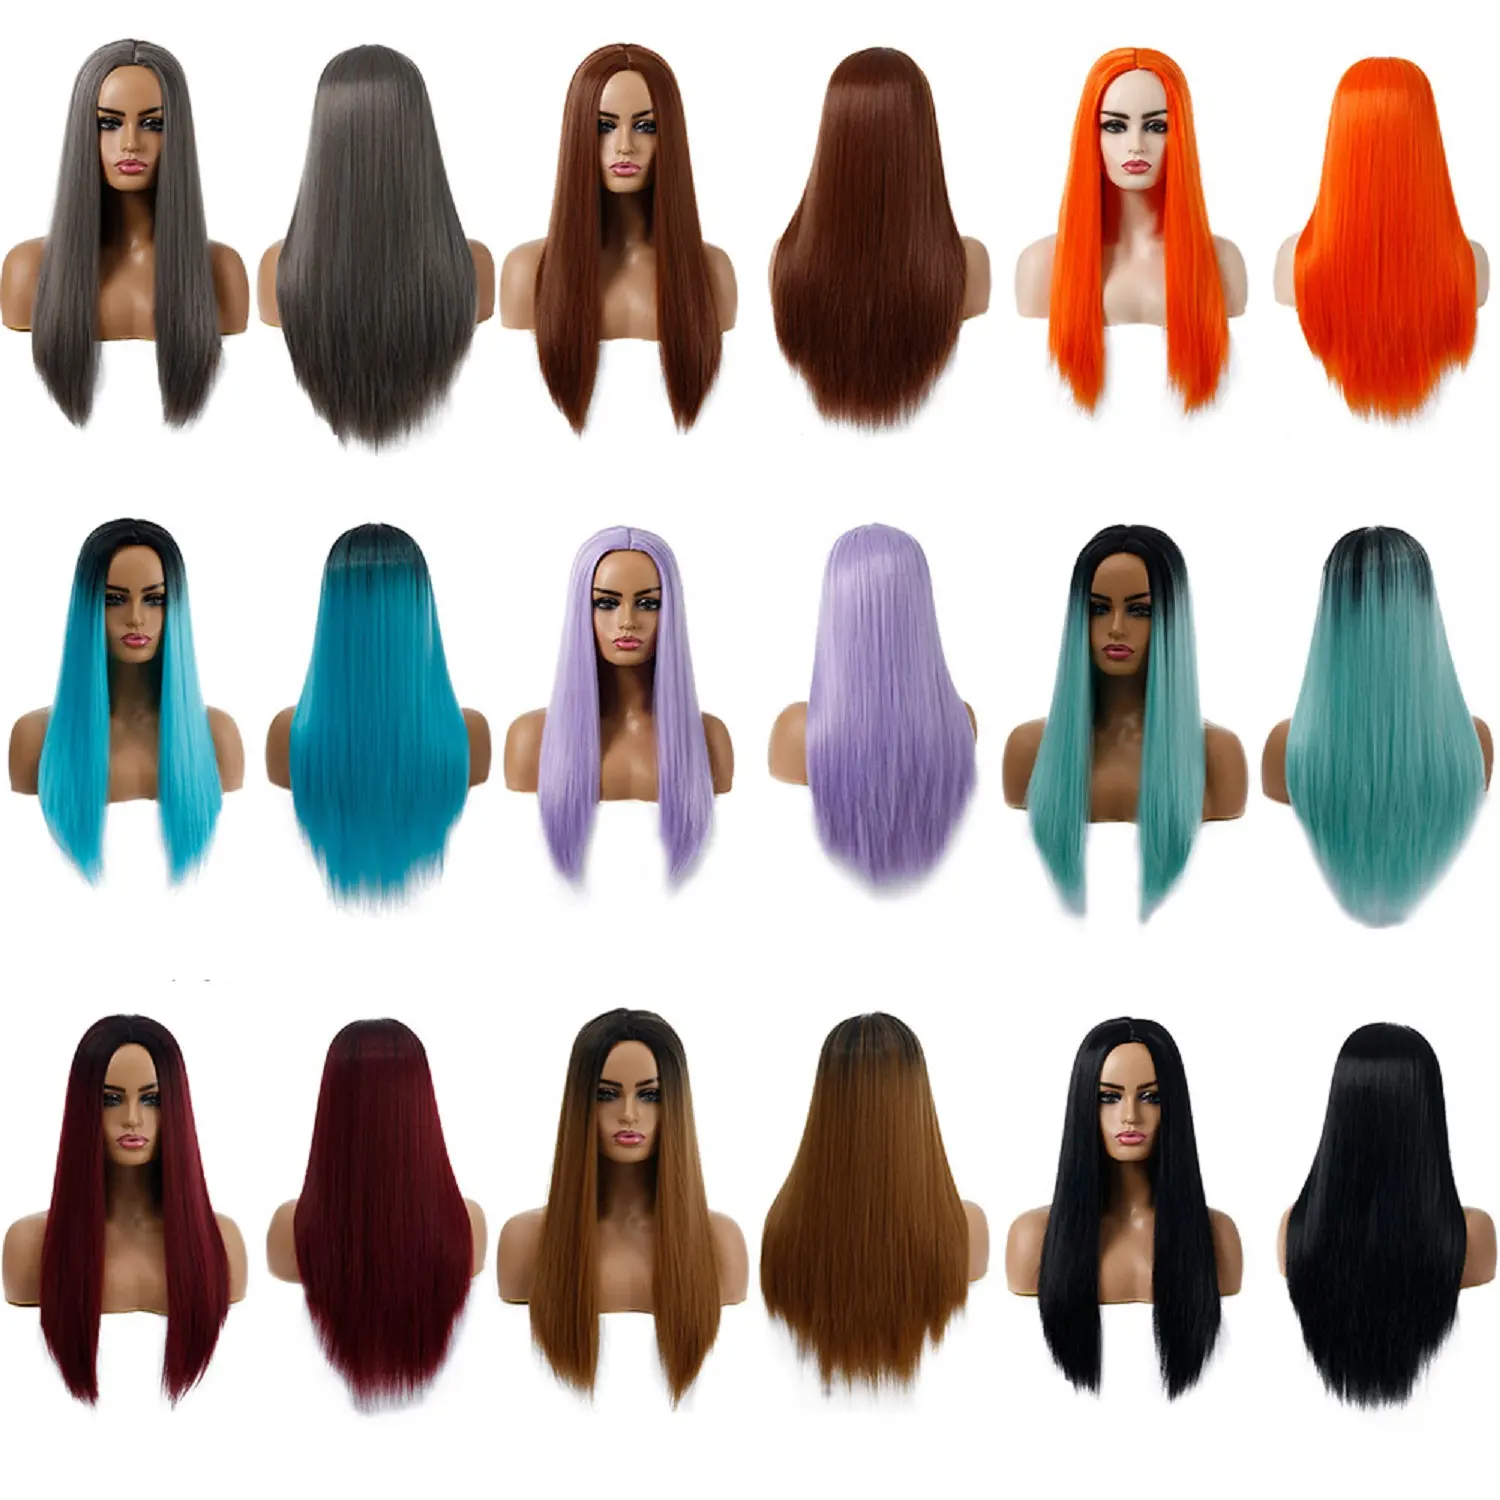 Long Straight Middle Part Wig For Women Black Orange Purple Hair Heat Resistant Synthetic Hair Wigs